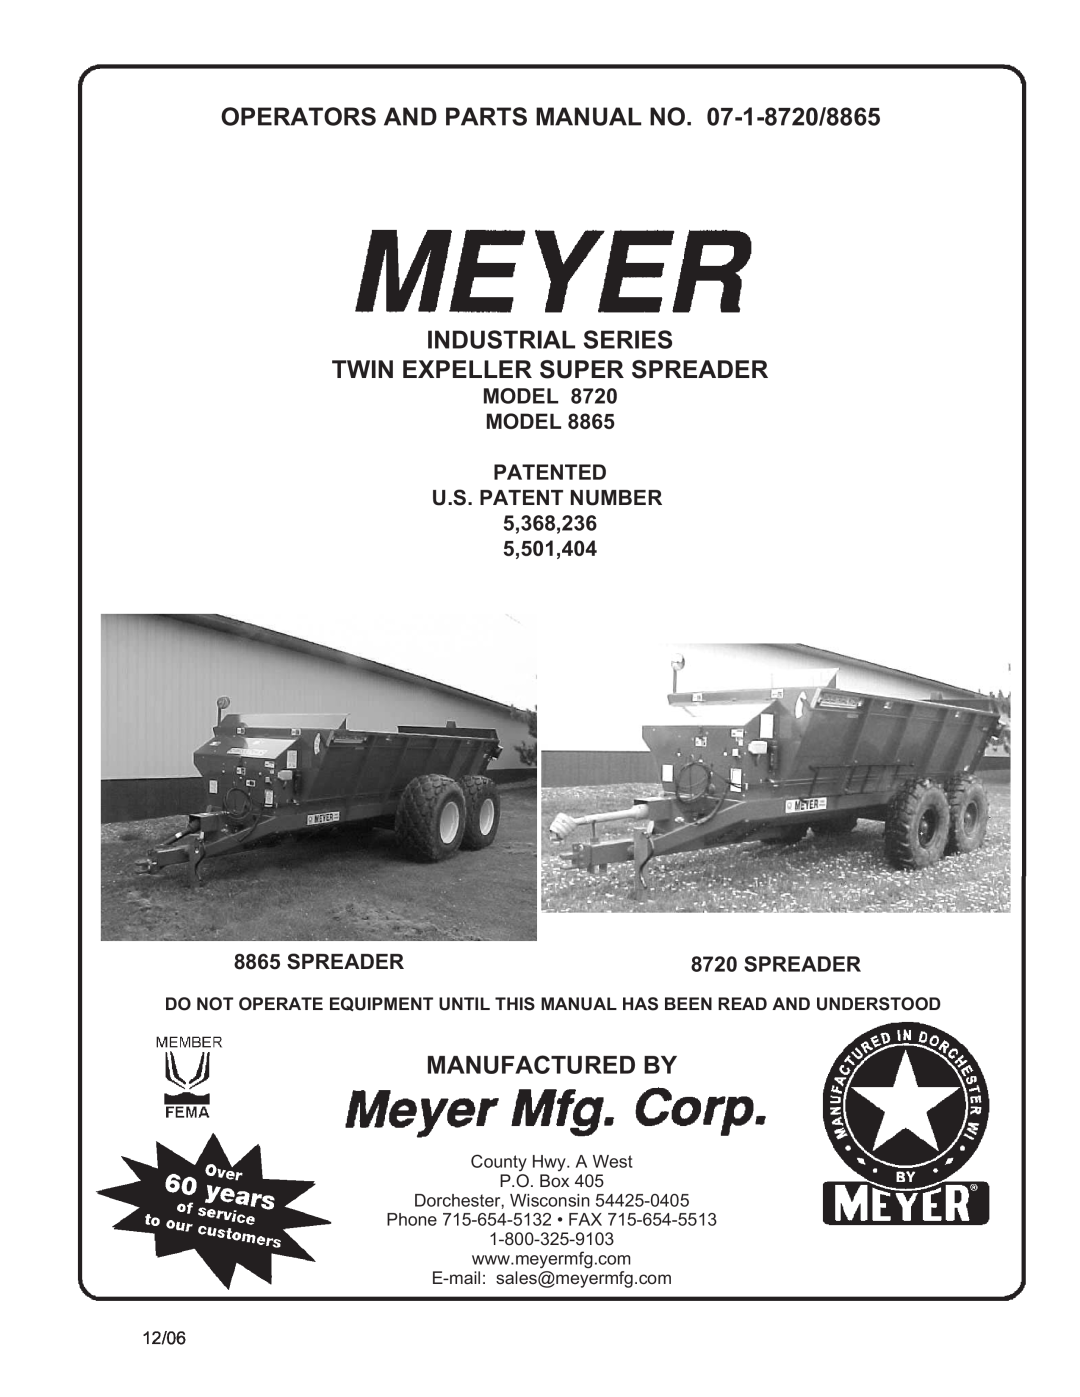 Meyer manual OPERATORS AND PARTS MANUAL NO. 07-1-8720/8865 INDUSTRIAL SERIES, Twin Expeller Super Spreader 